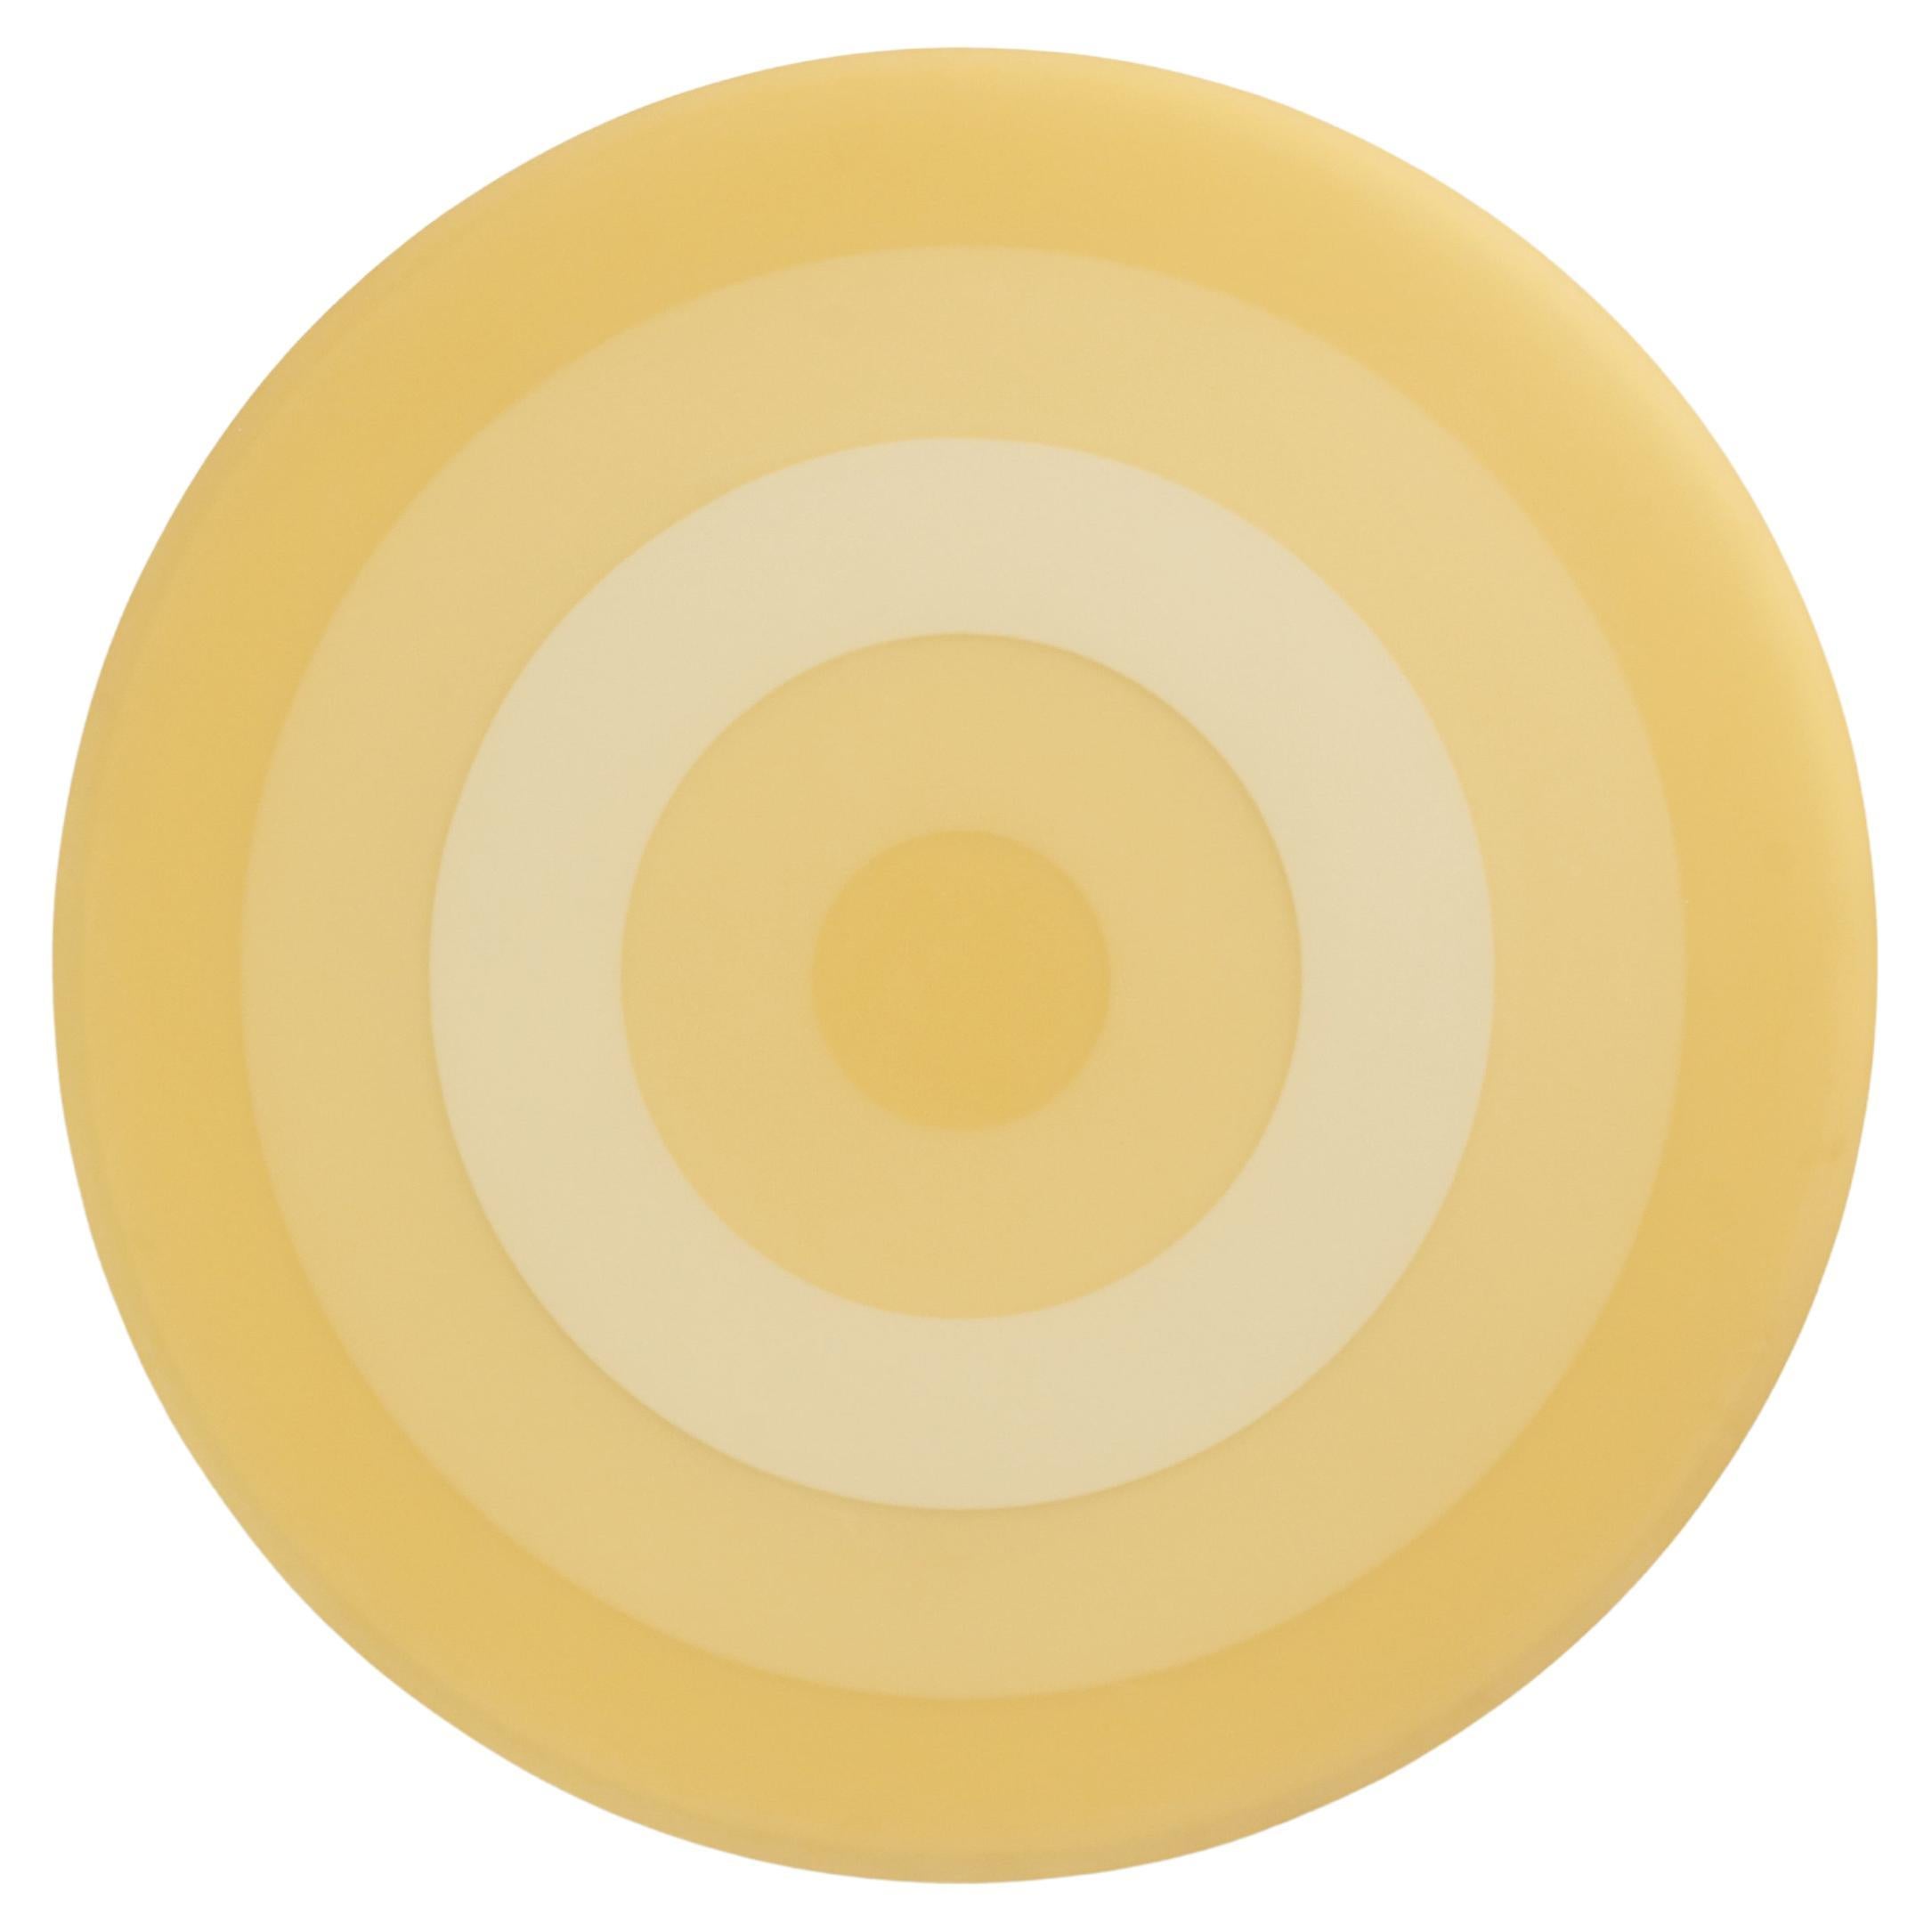 Scale Rings Resin Wall Decor Yellow by Facture, Represented by Tuleste Factory For Sale